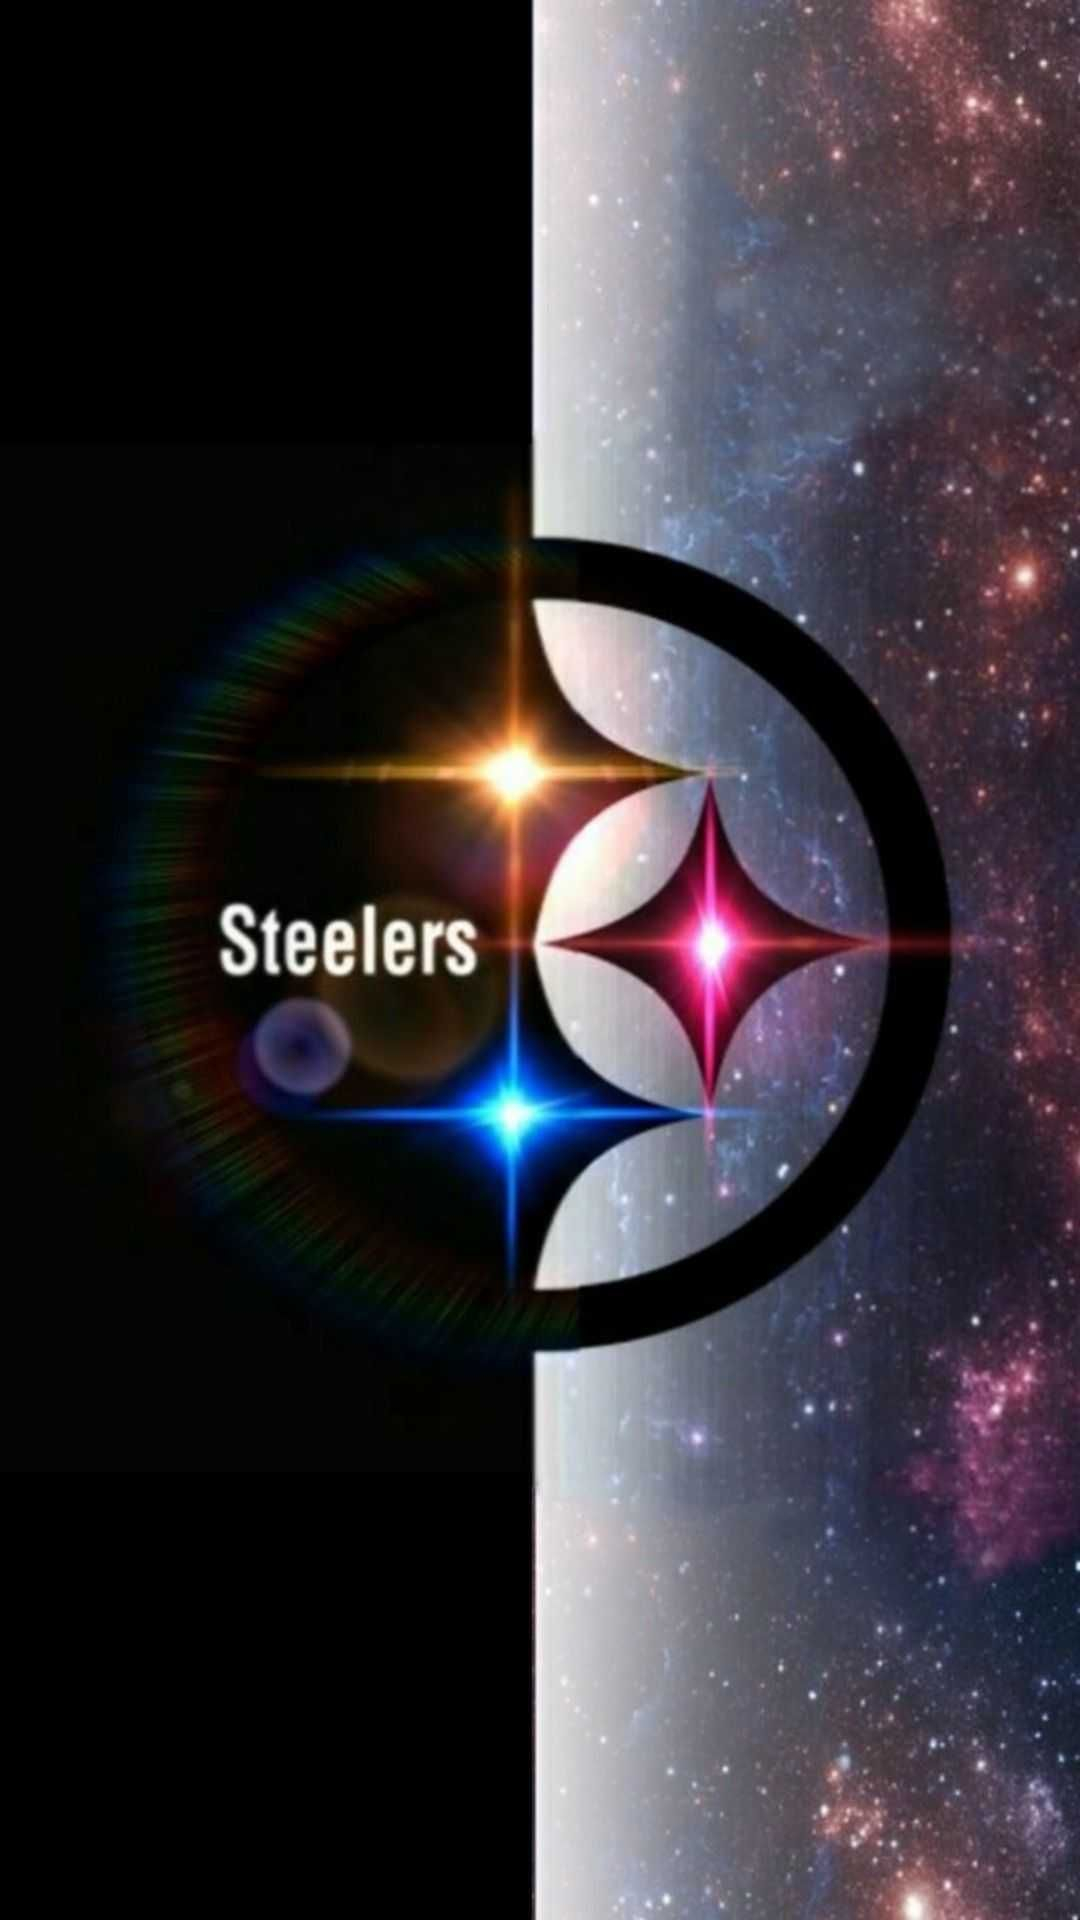 1080x1920 Steelers Wallpaper Discover more 1080p, android, antonio brown, background, cool wallpaper. htt&acirc;&#128;&brvbar; | Pittsburgh steelers wallpaper, Pittsburgh steelers logo, Steelers